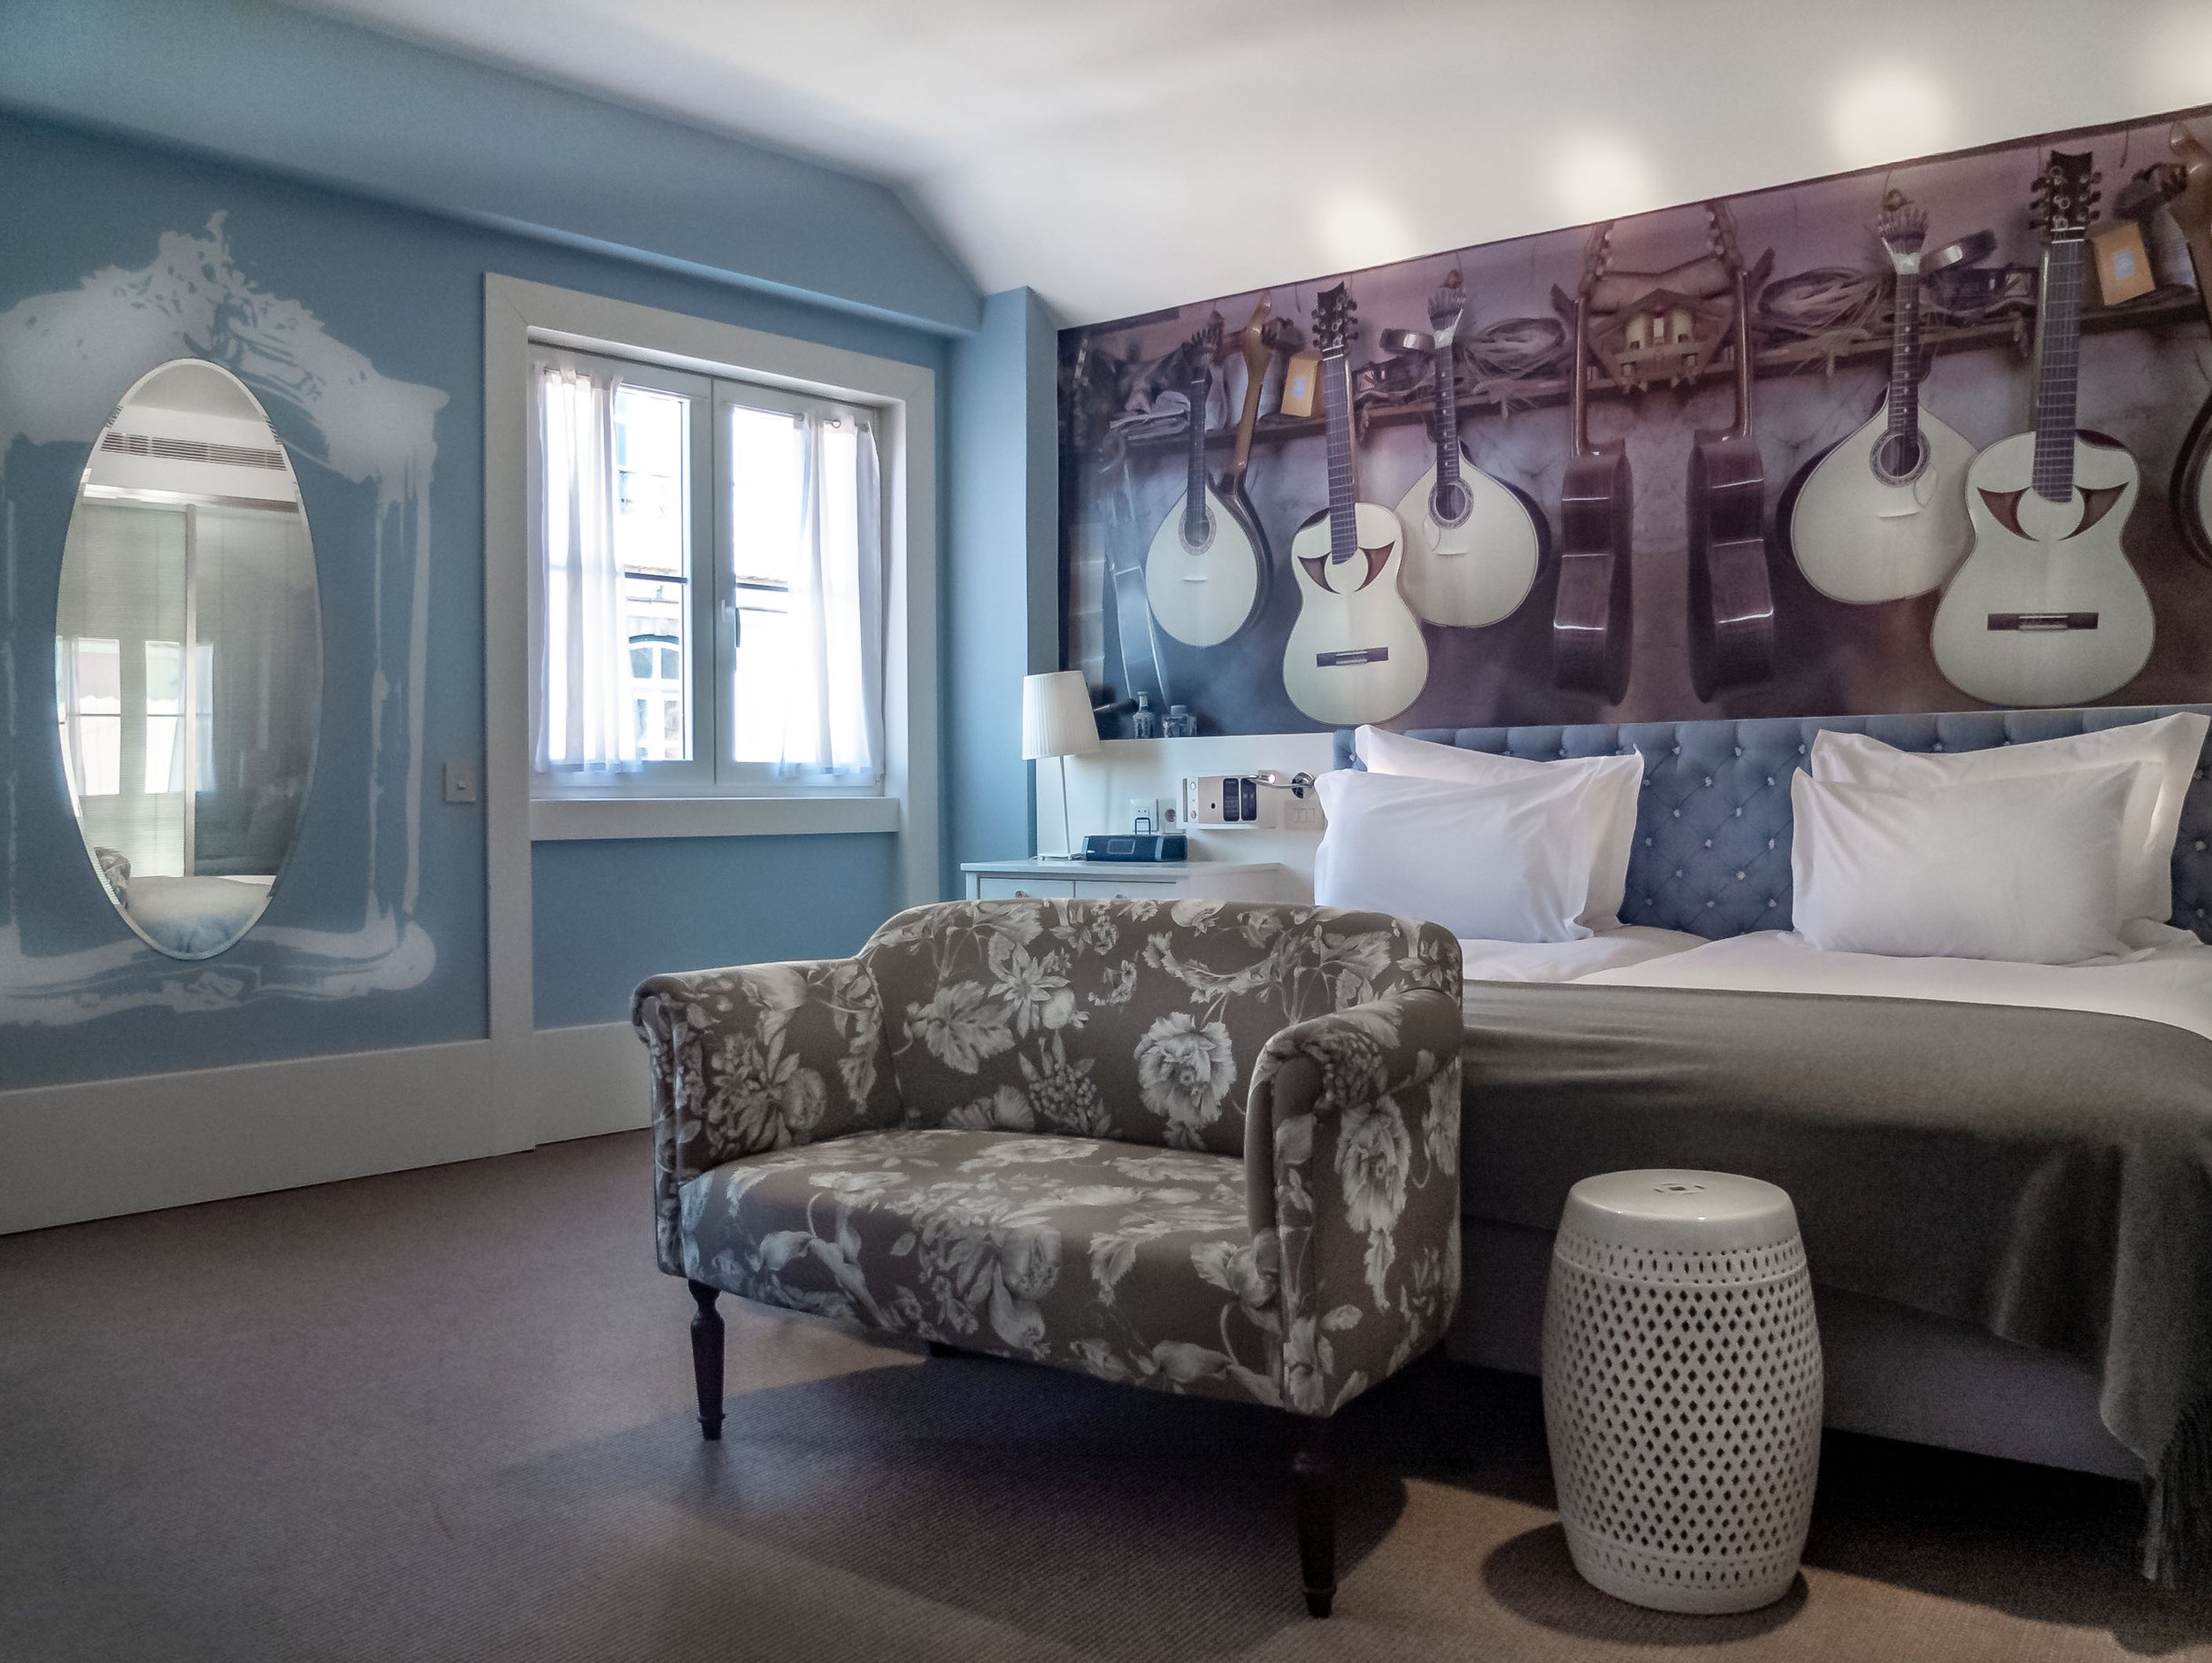 LX Boutique Hotel in Lisbon